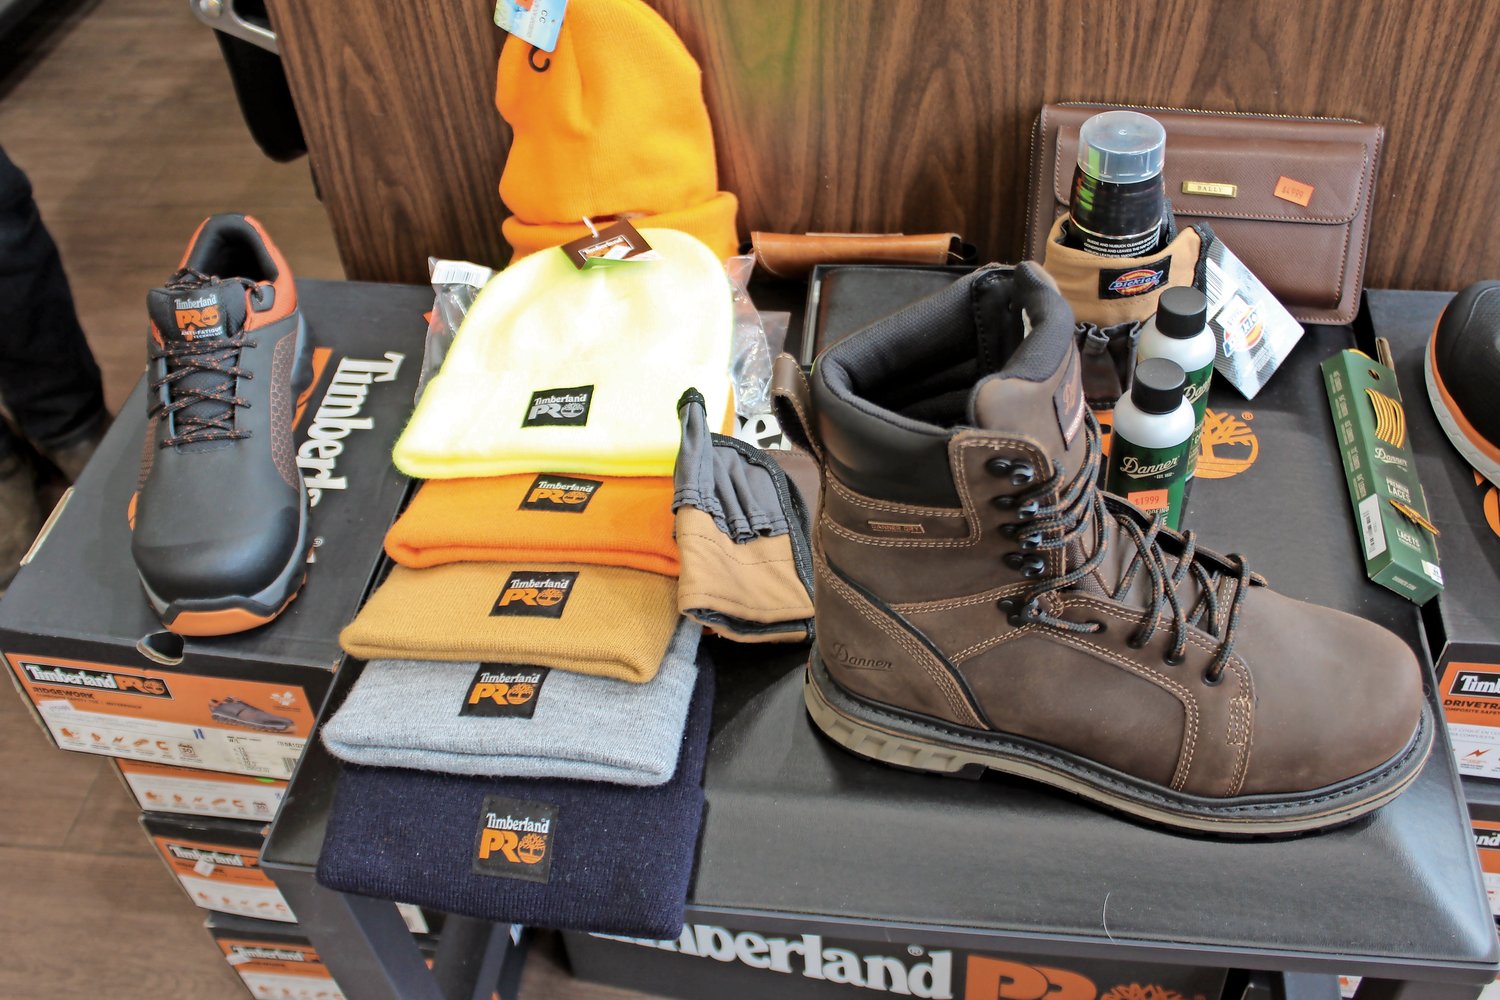 RLB Safety sells clothing and equipment for construction workers.